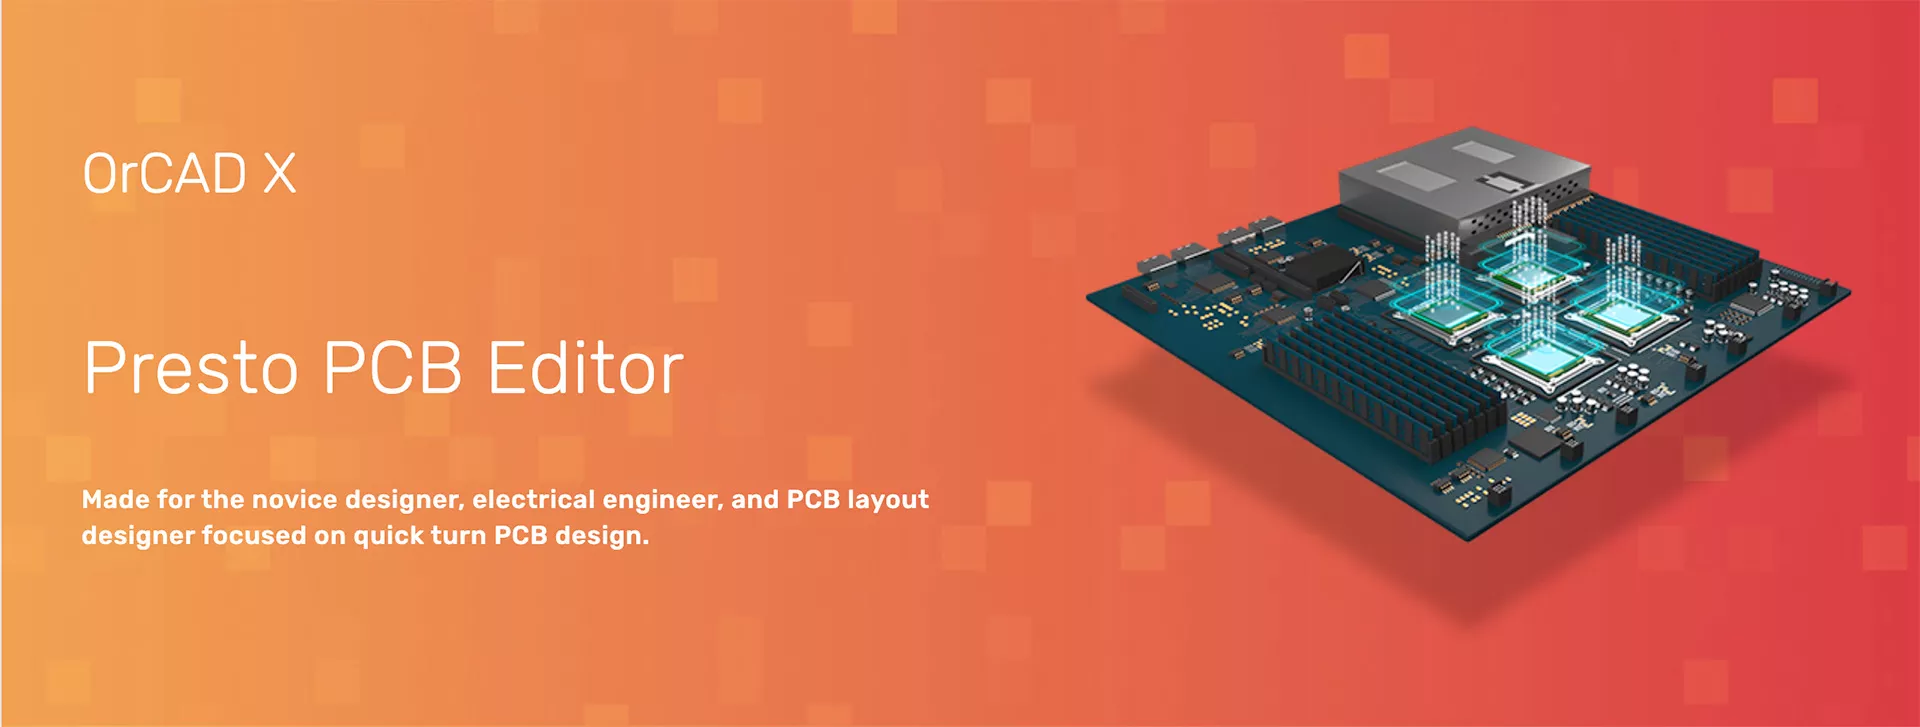 Presto PCB Editor: Made for the novice designer, electrical engineer, and PCB layout designer focused on quick turn PCB design.